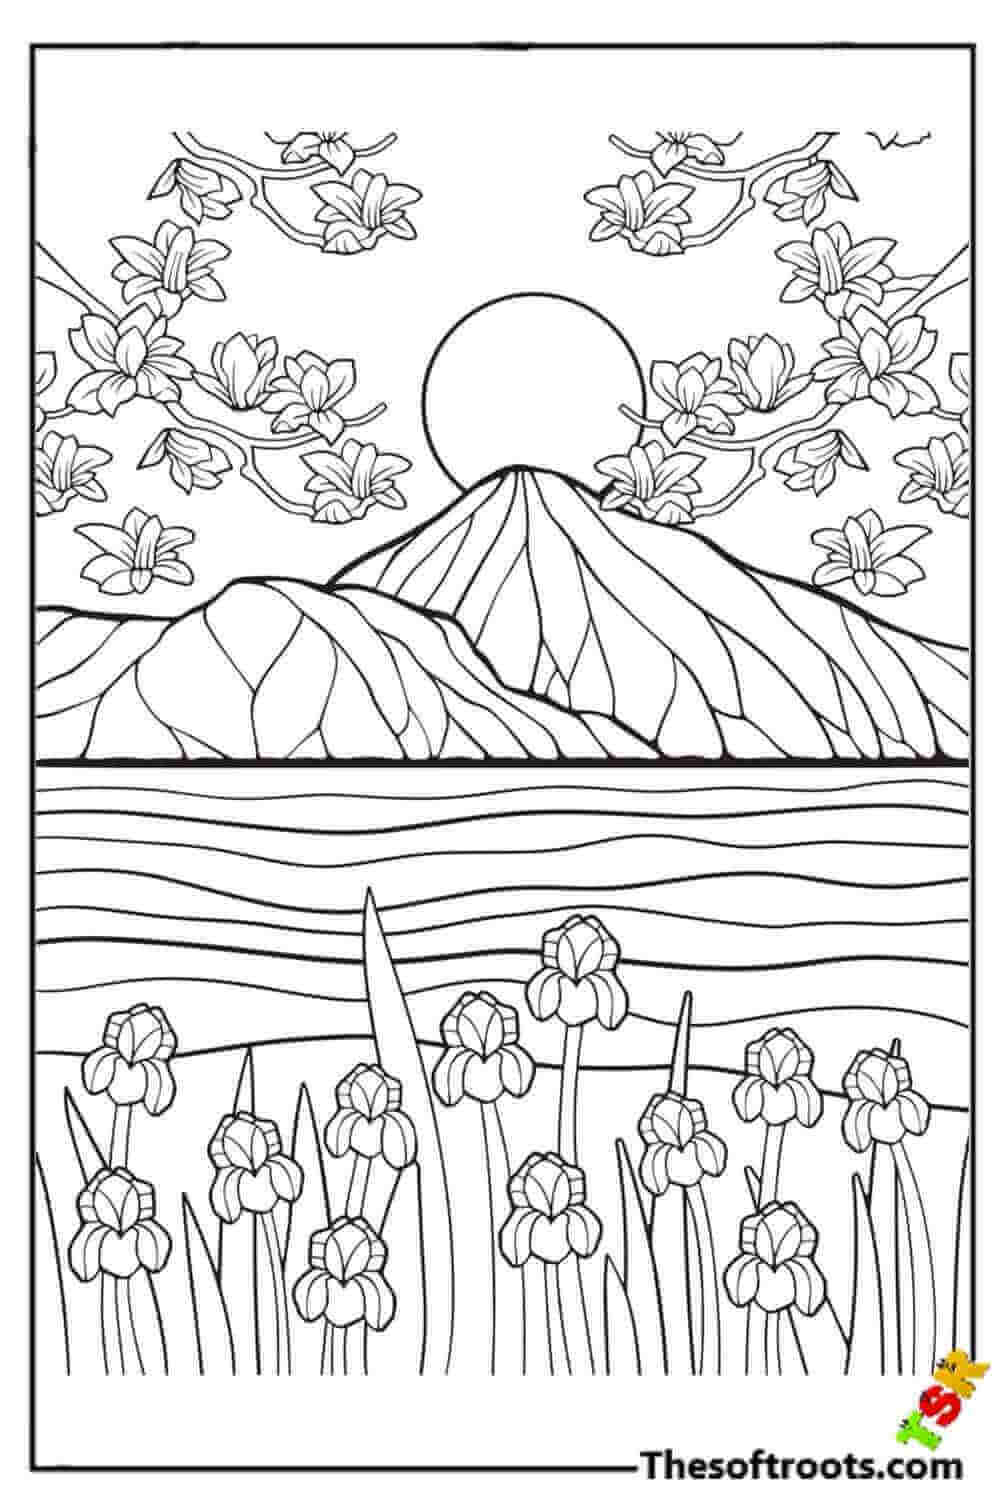 Adult Mountain coloring pages